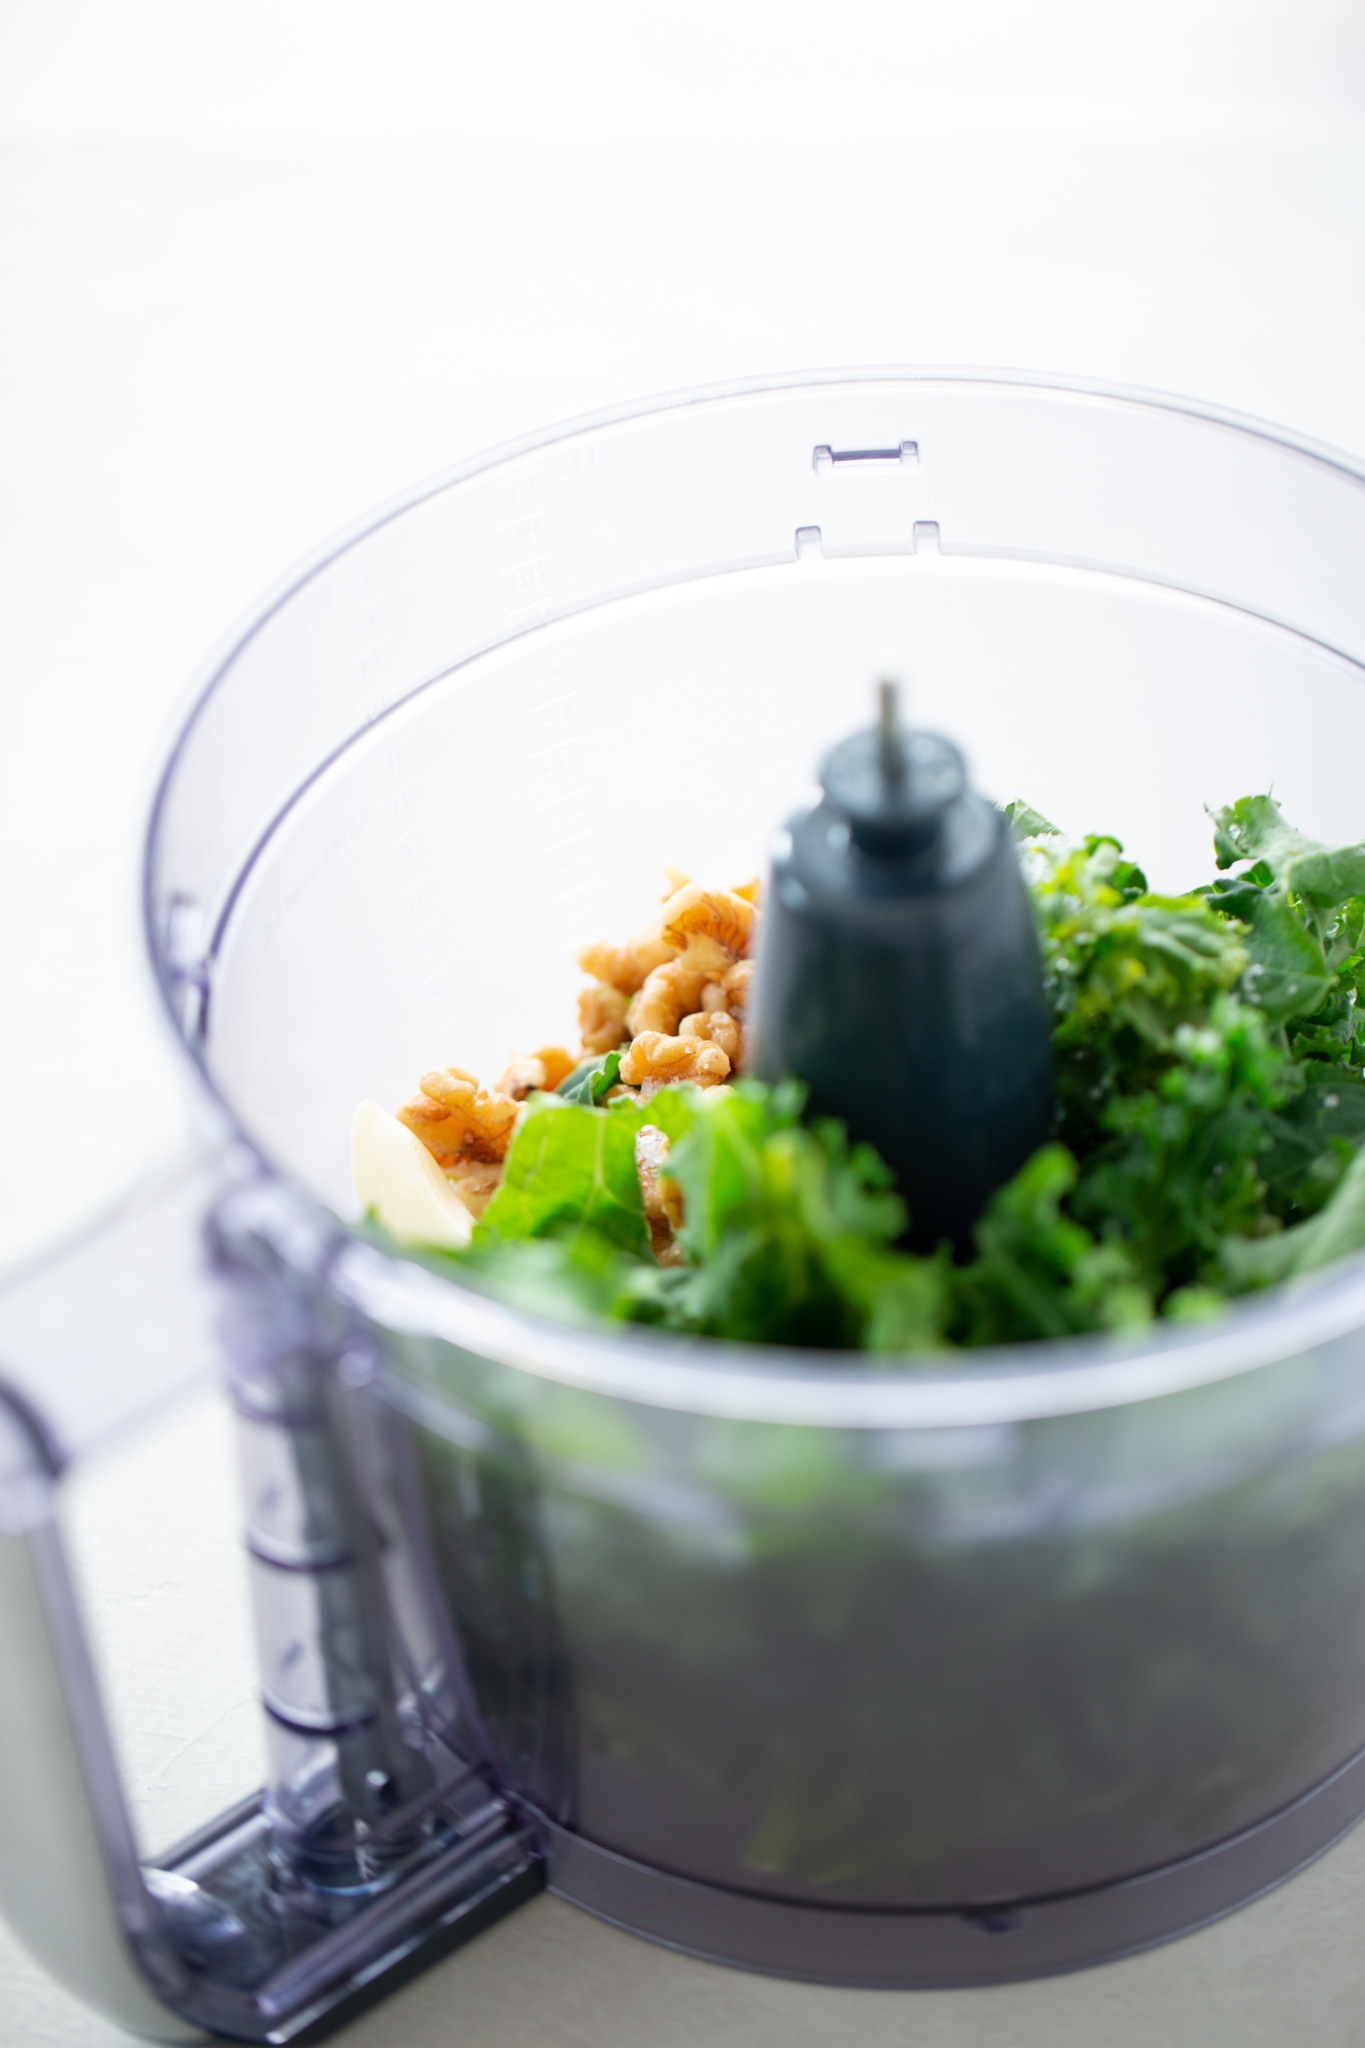 kale and walnuts in the food processor container